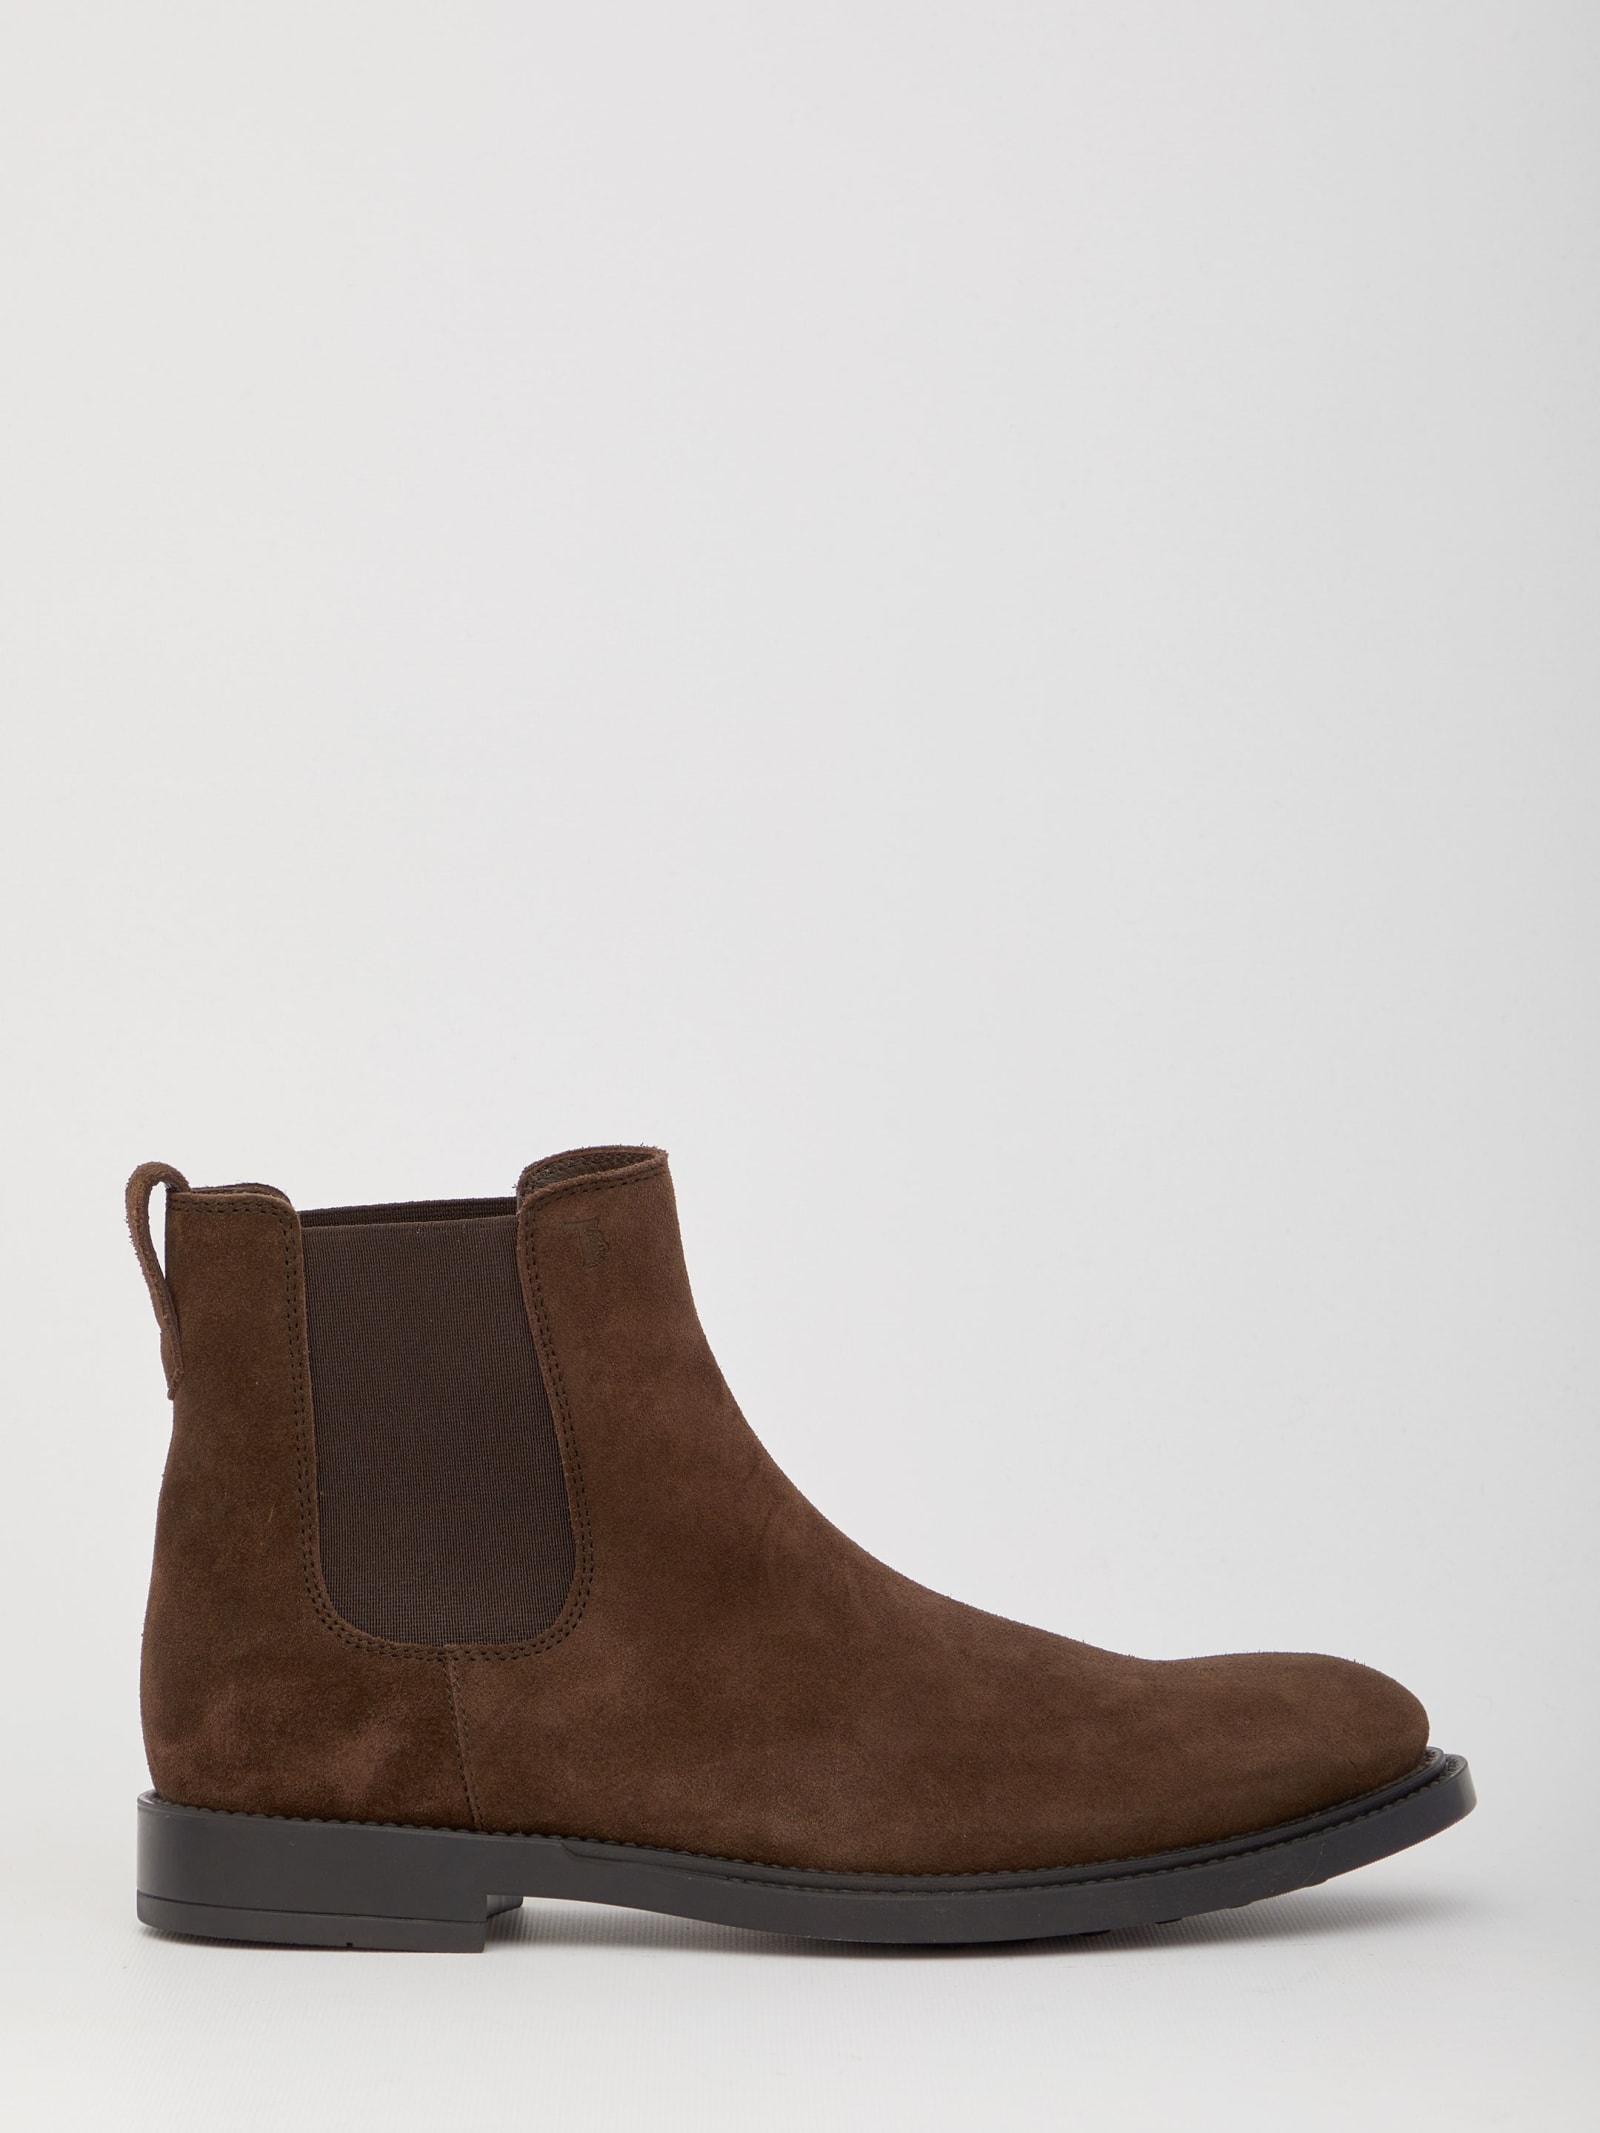 Tod's Brown Suede Ankle Boots